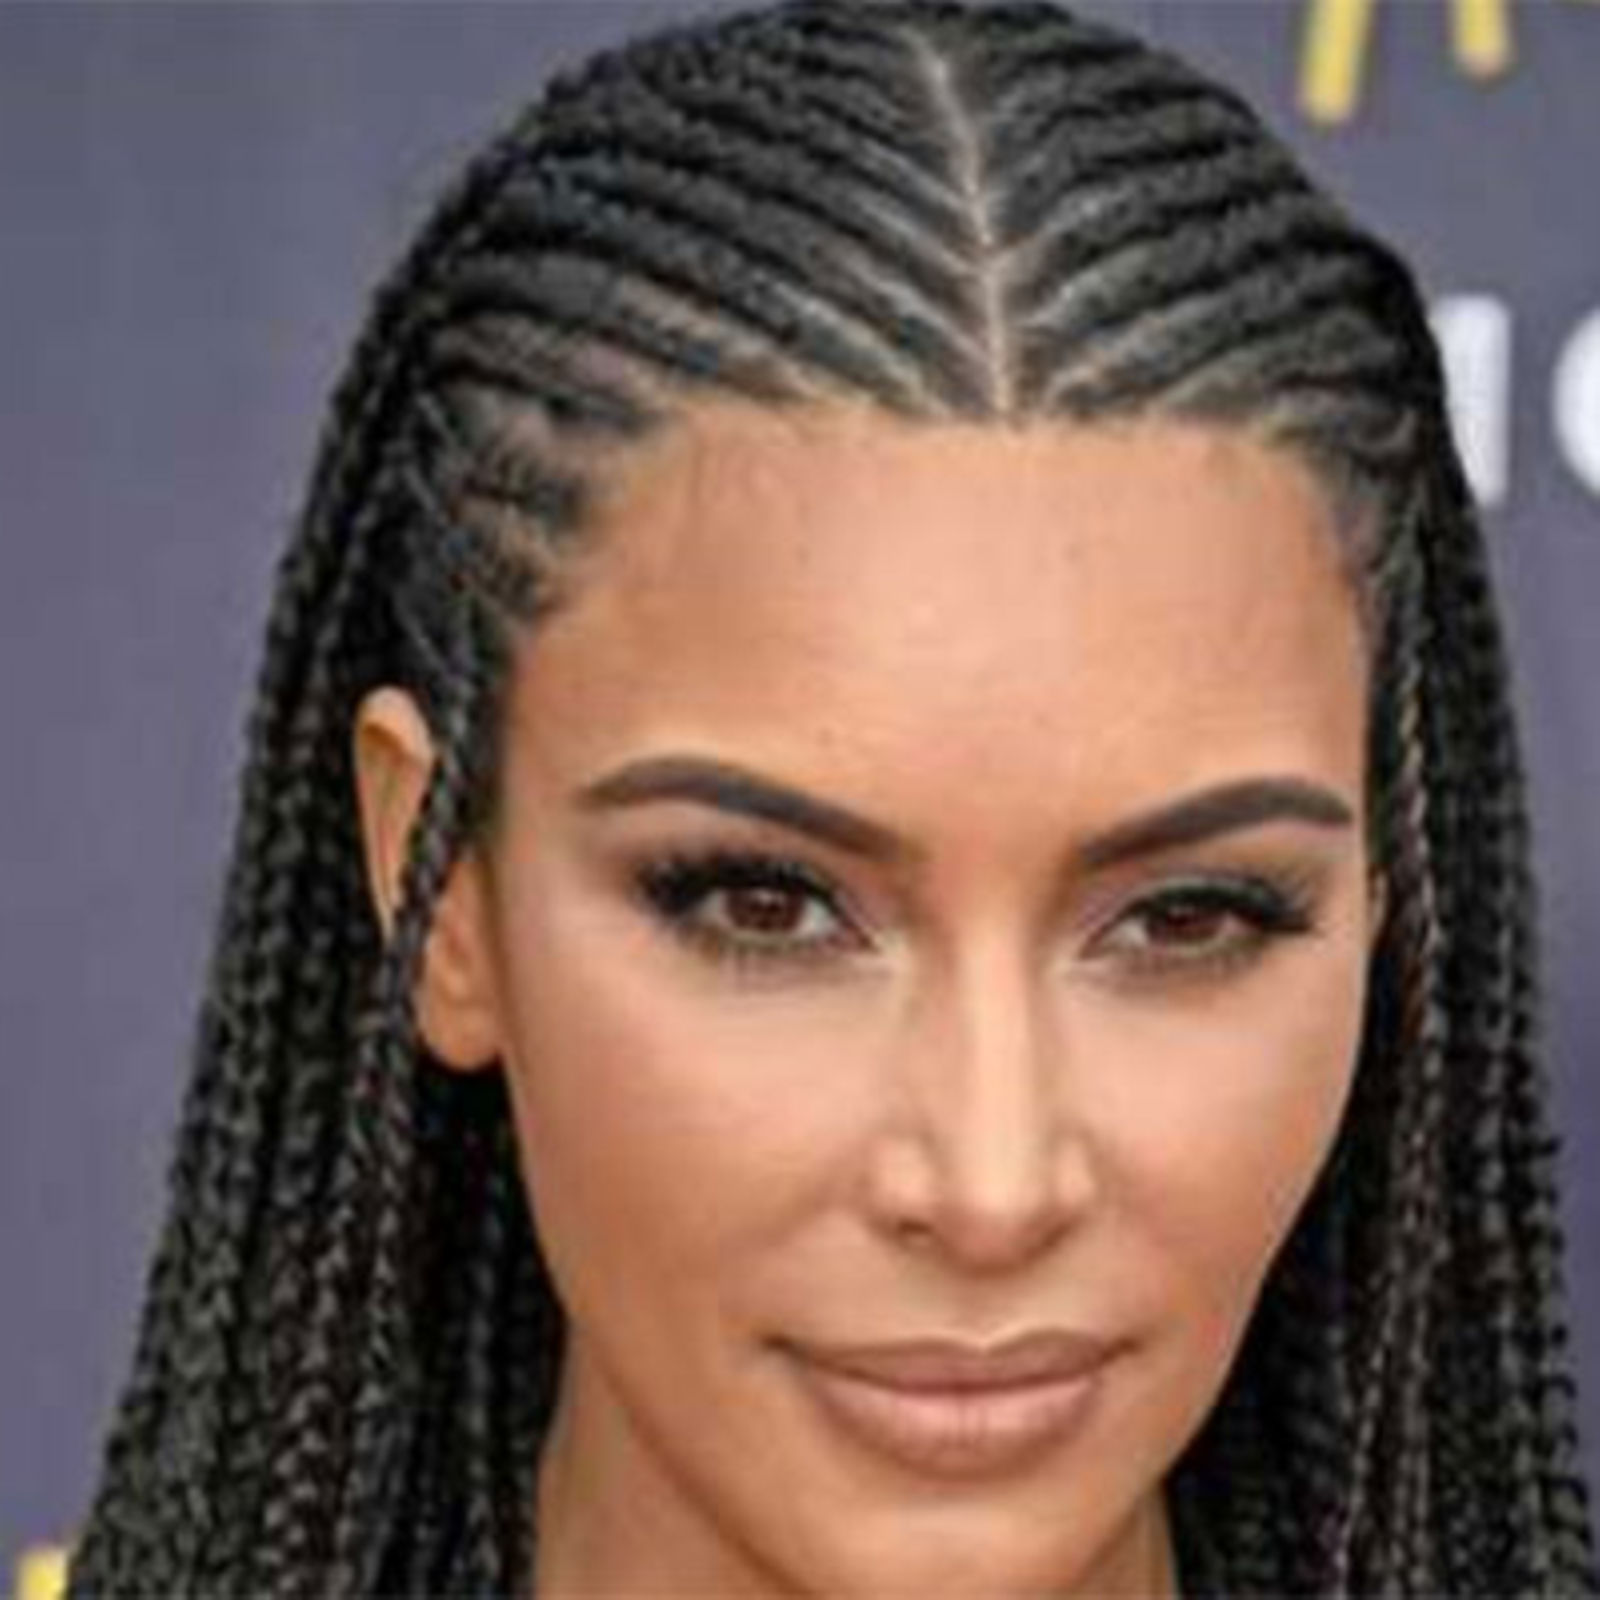 BOXER BRAIDS: The Hairstyle That's Taking Over! - The Fashion Tag Blog